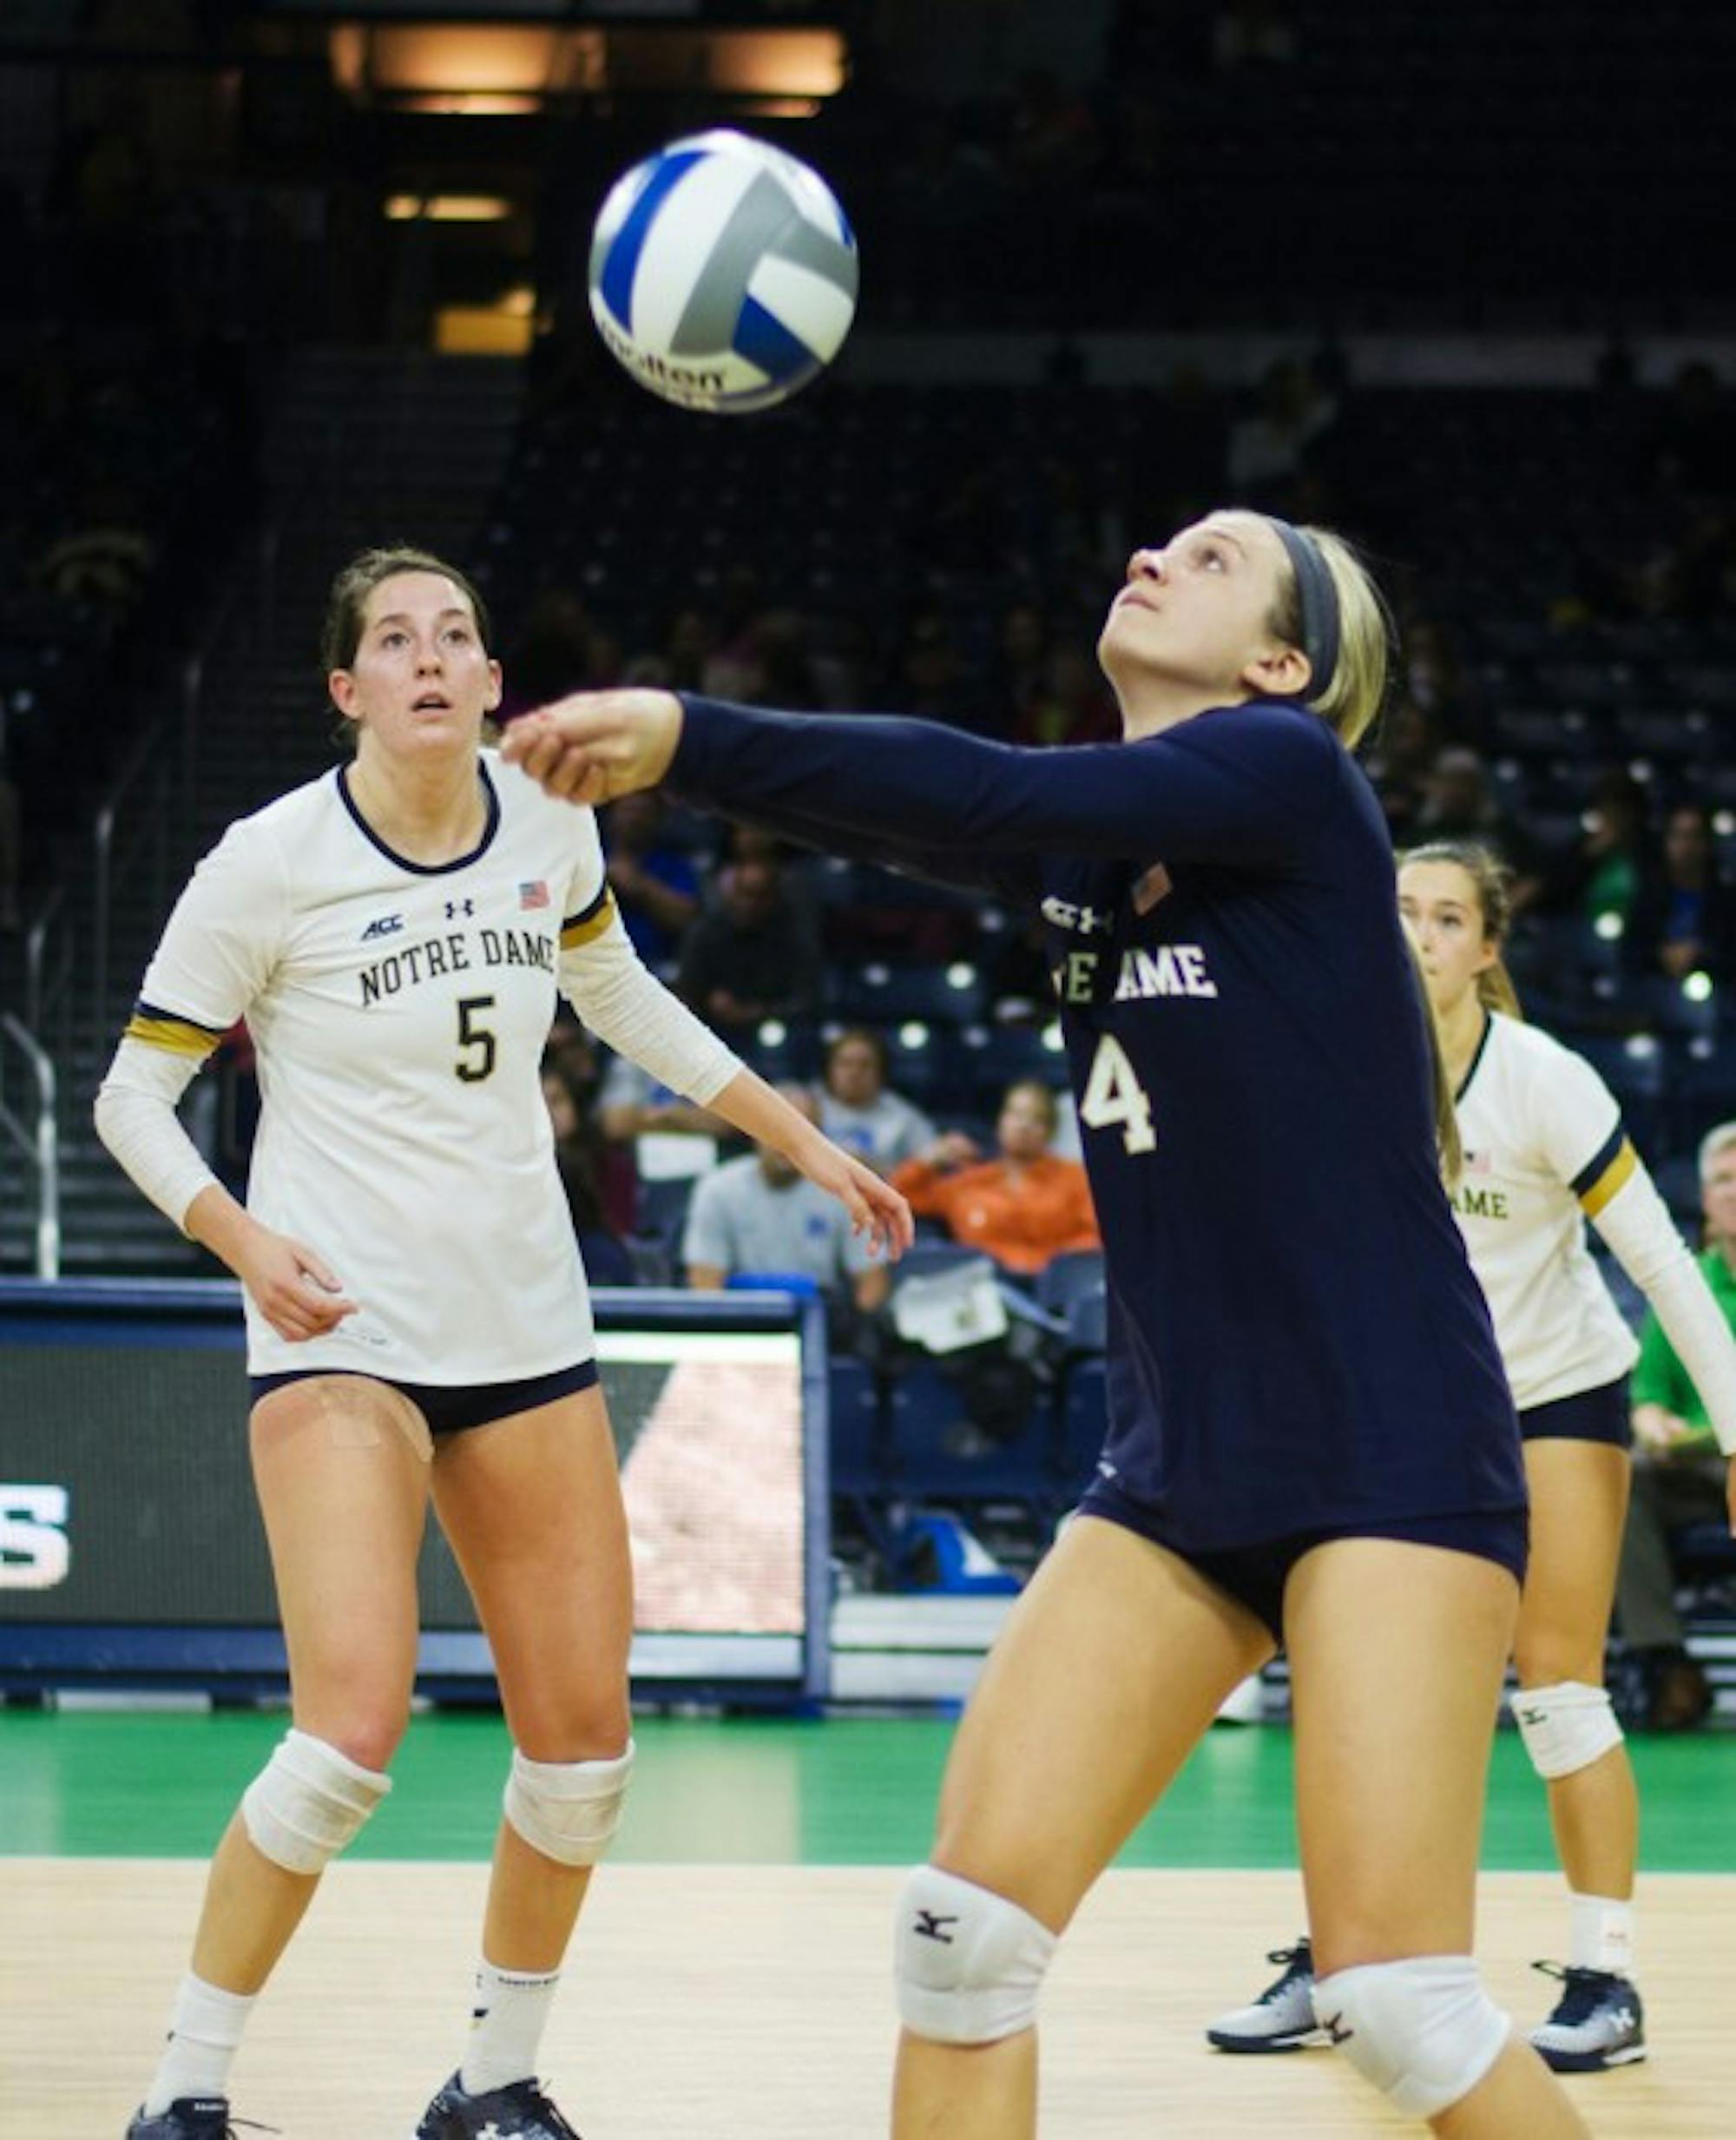 WEB - 20161001, 20160930, Purcell Pavilion, Volleyball, Wei Cao, Women's Volleyball